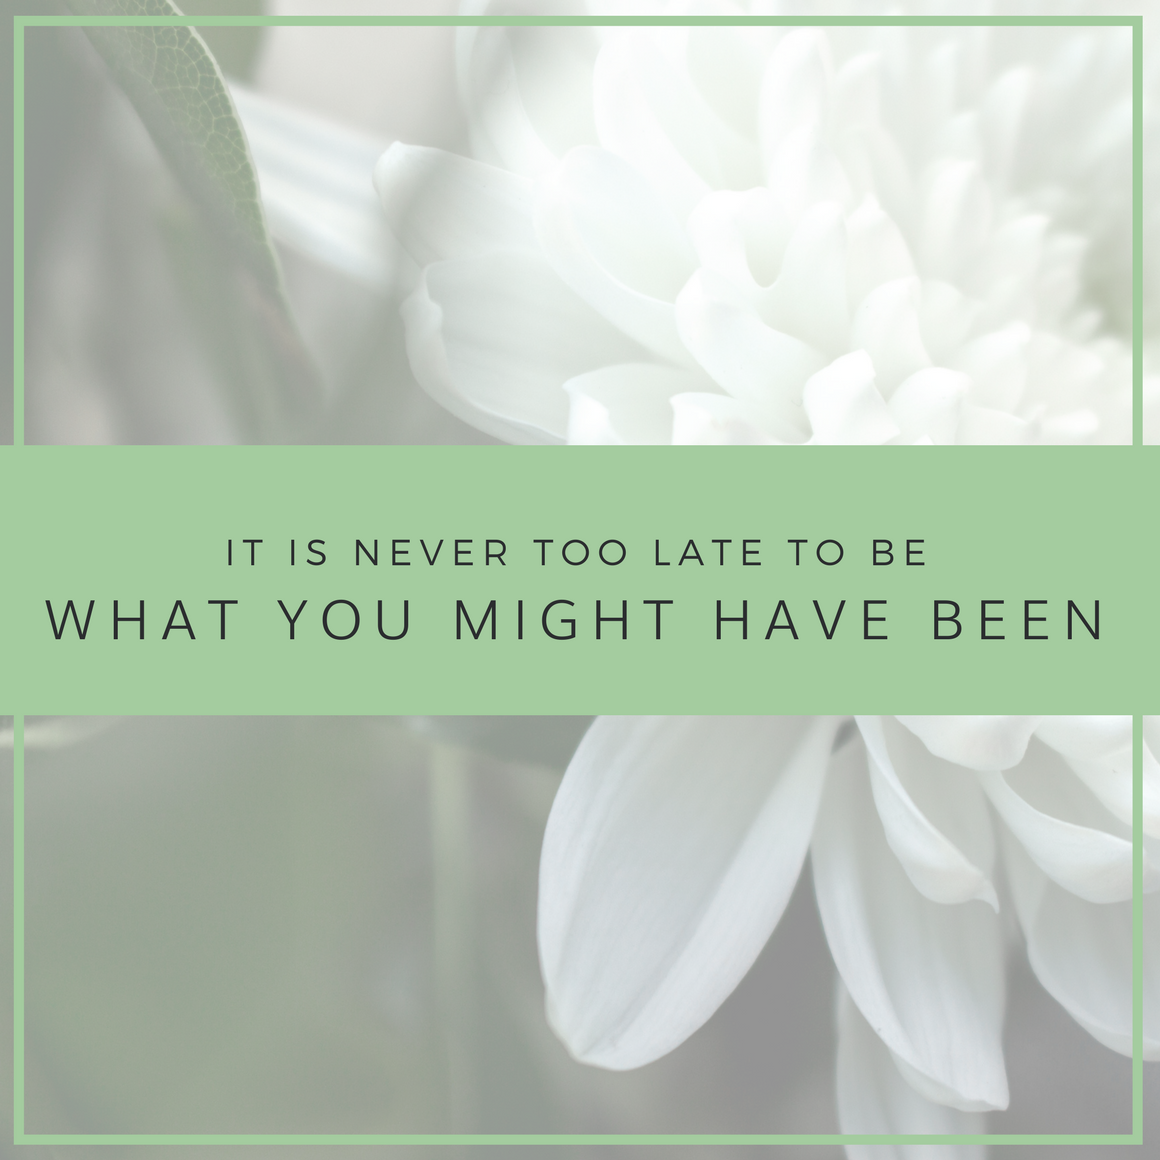 it is never too late to be what you might have been